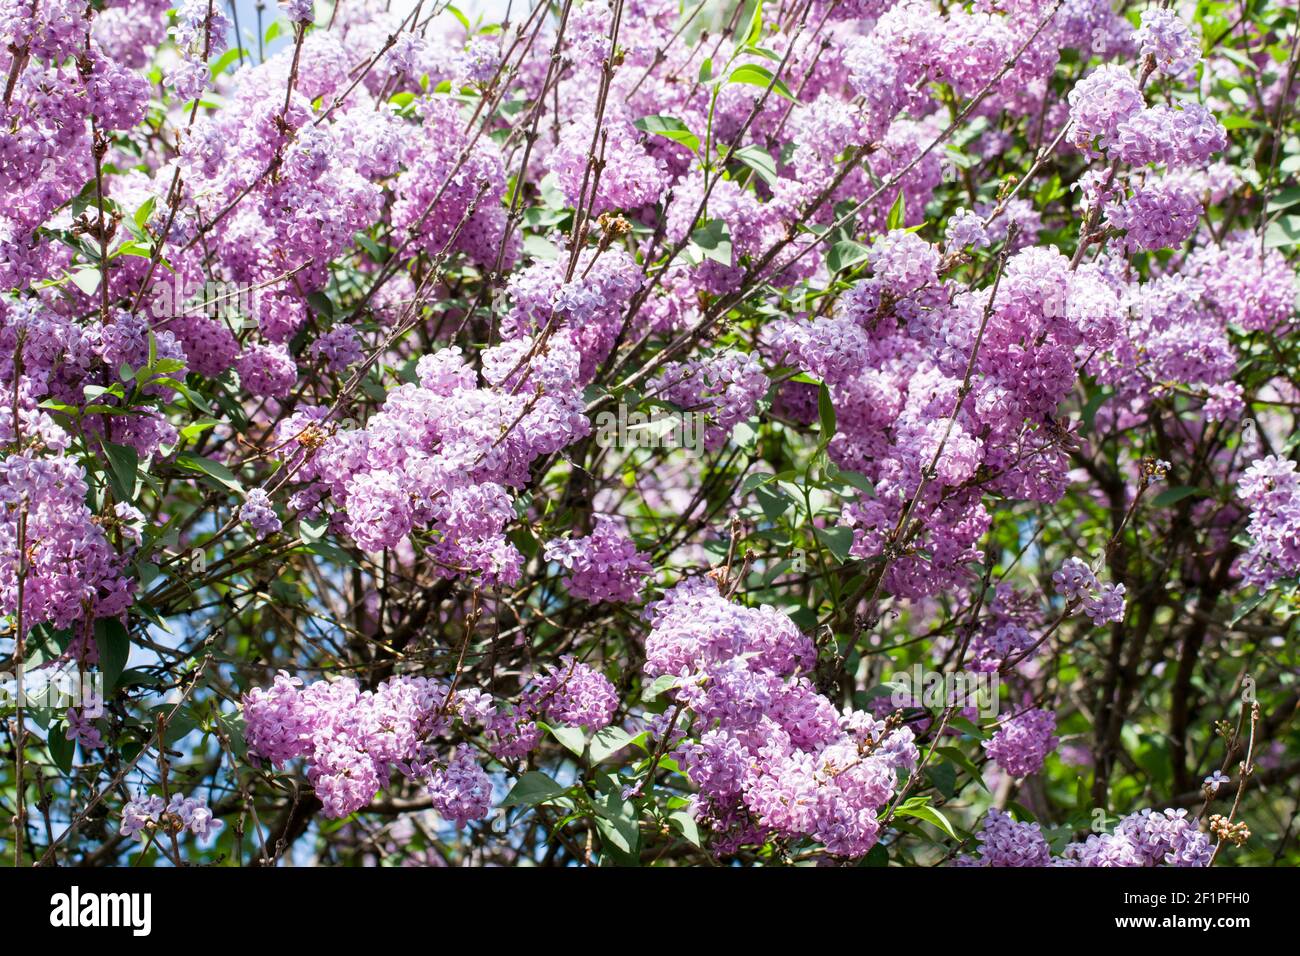 Light purple lilac tree. The lilac is a very popular ornamental plant in gardens and parks, because of its attractive, sweet-smelling flowers. Stock Photo